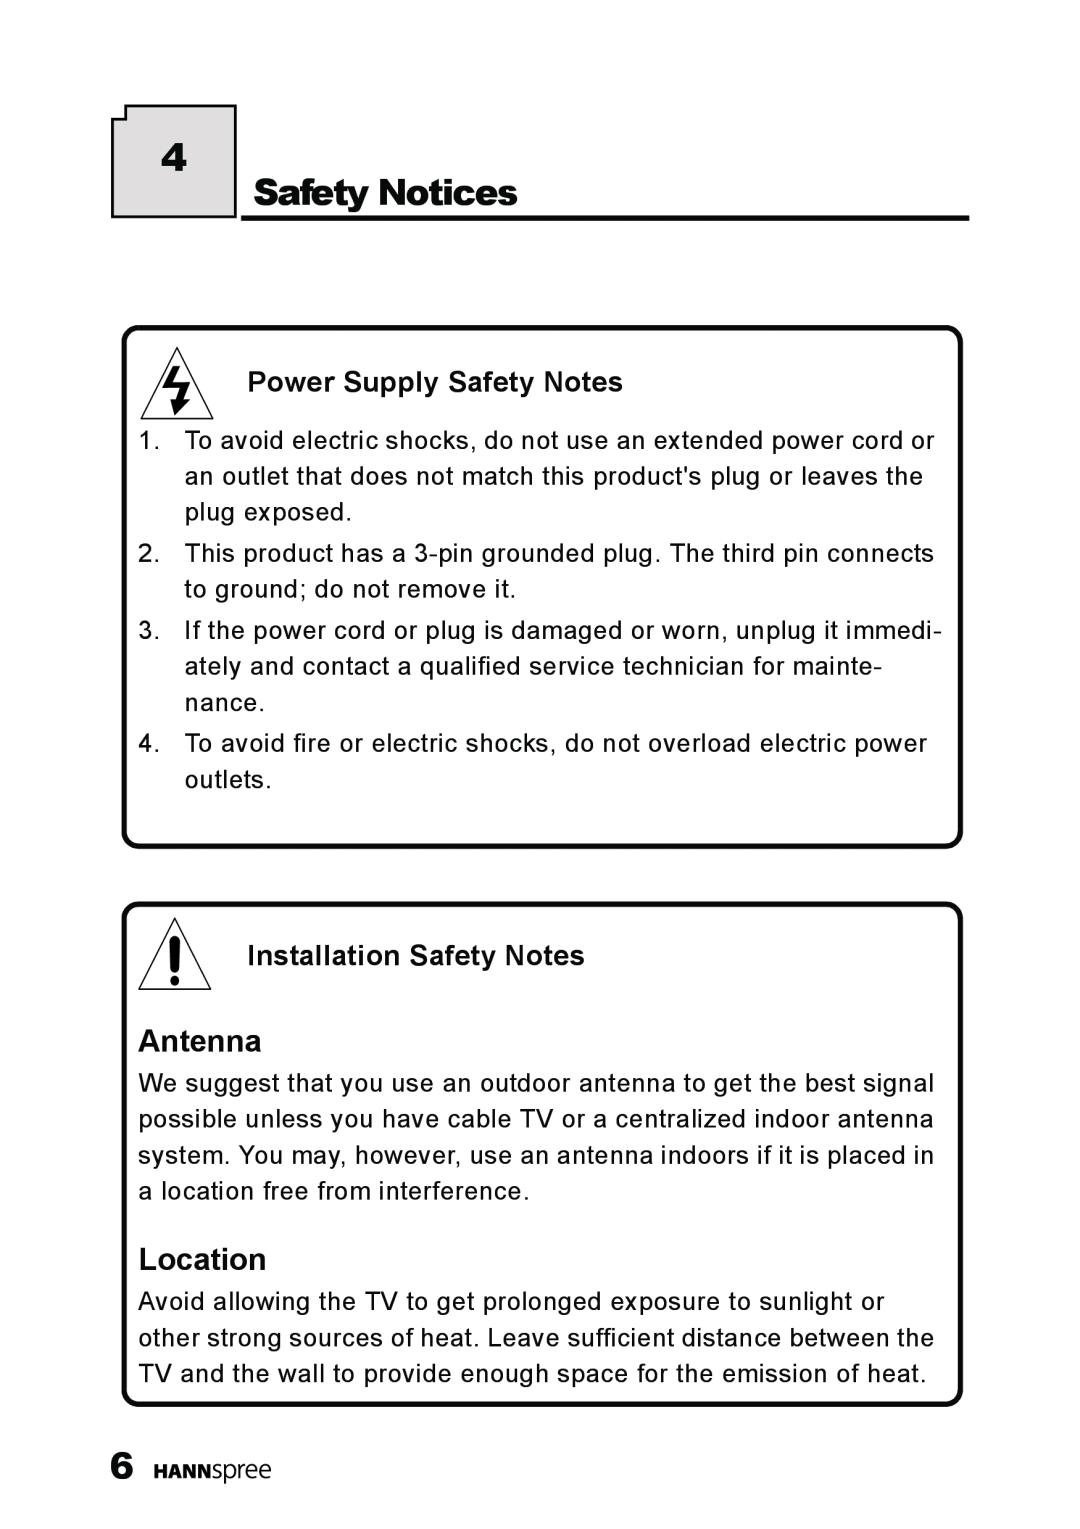 HANNspree ST09-10A1 user manual Safety Notices, Antenna, Location, Power Supply Safety Notes, Installation Safety Notes 